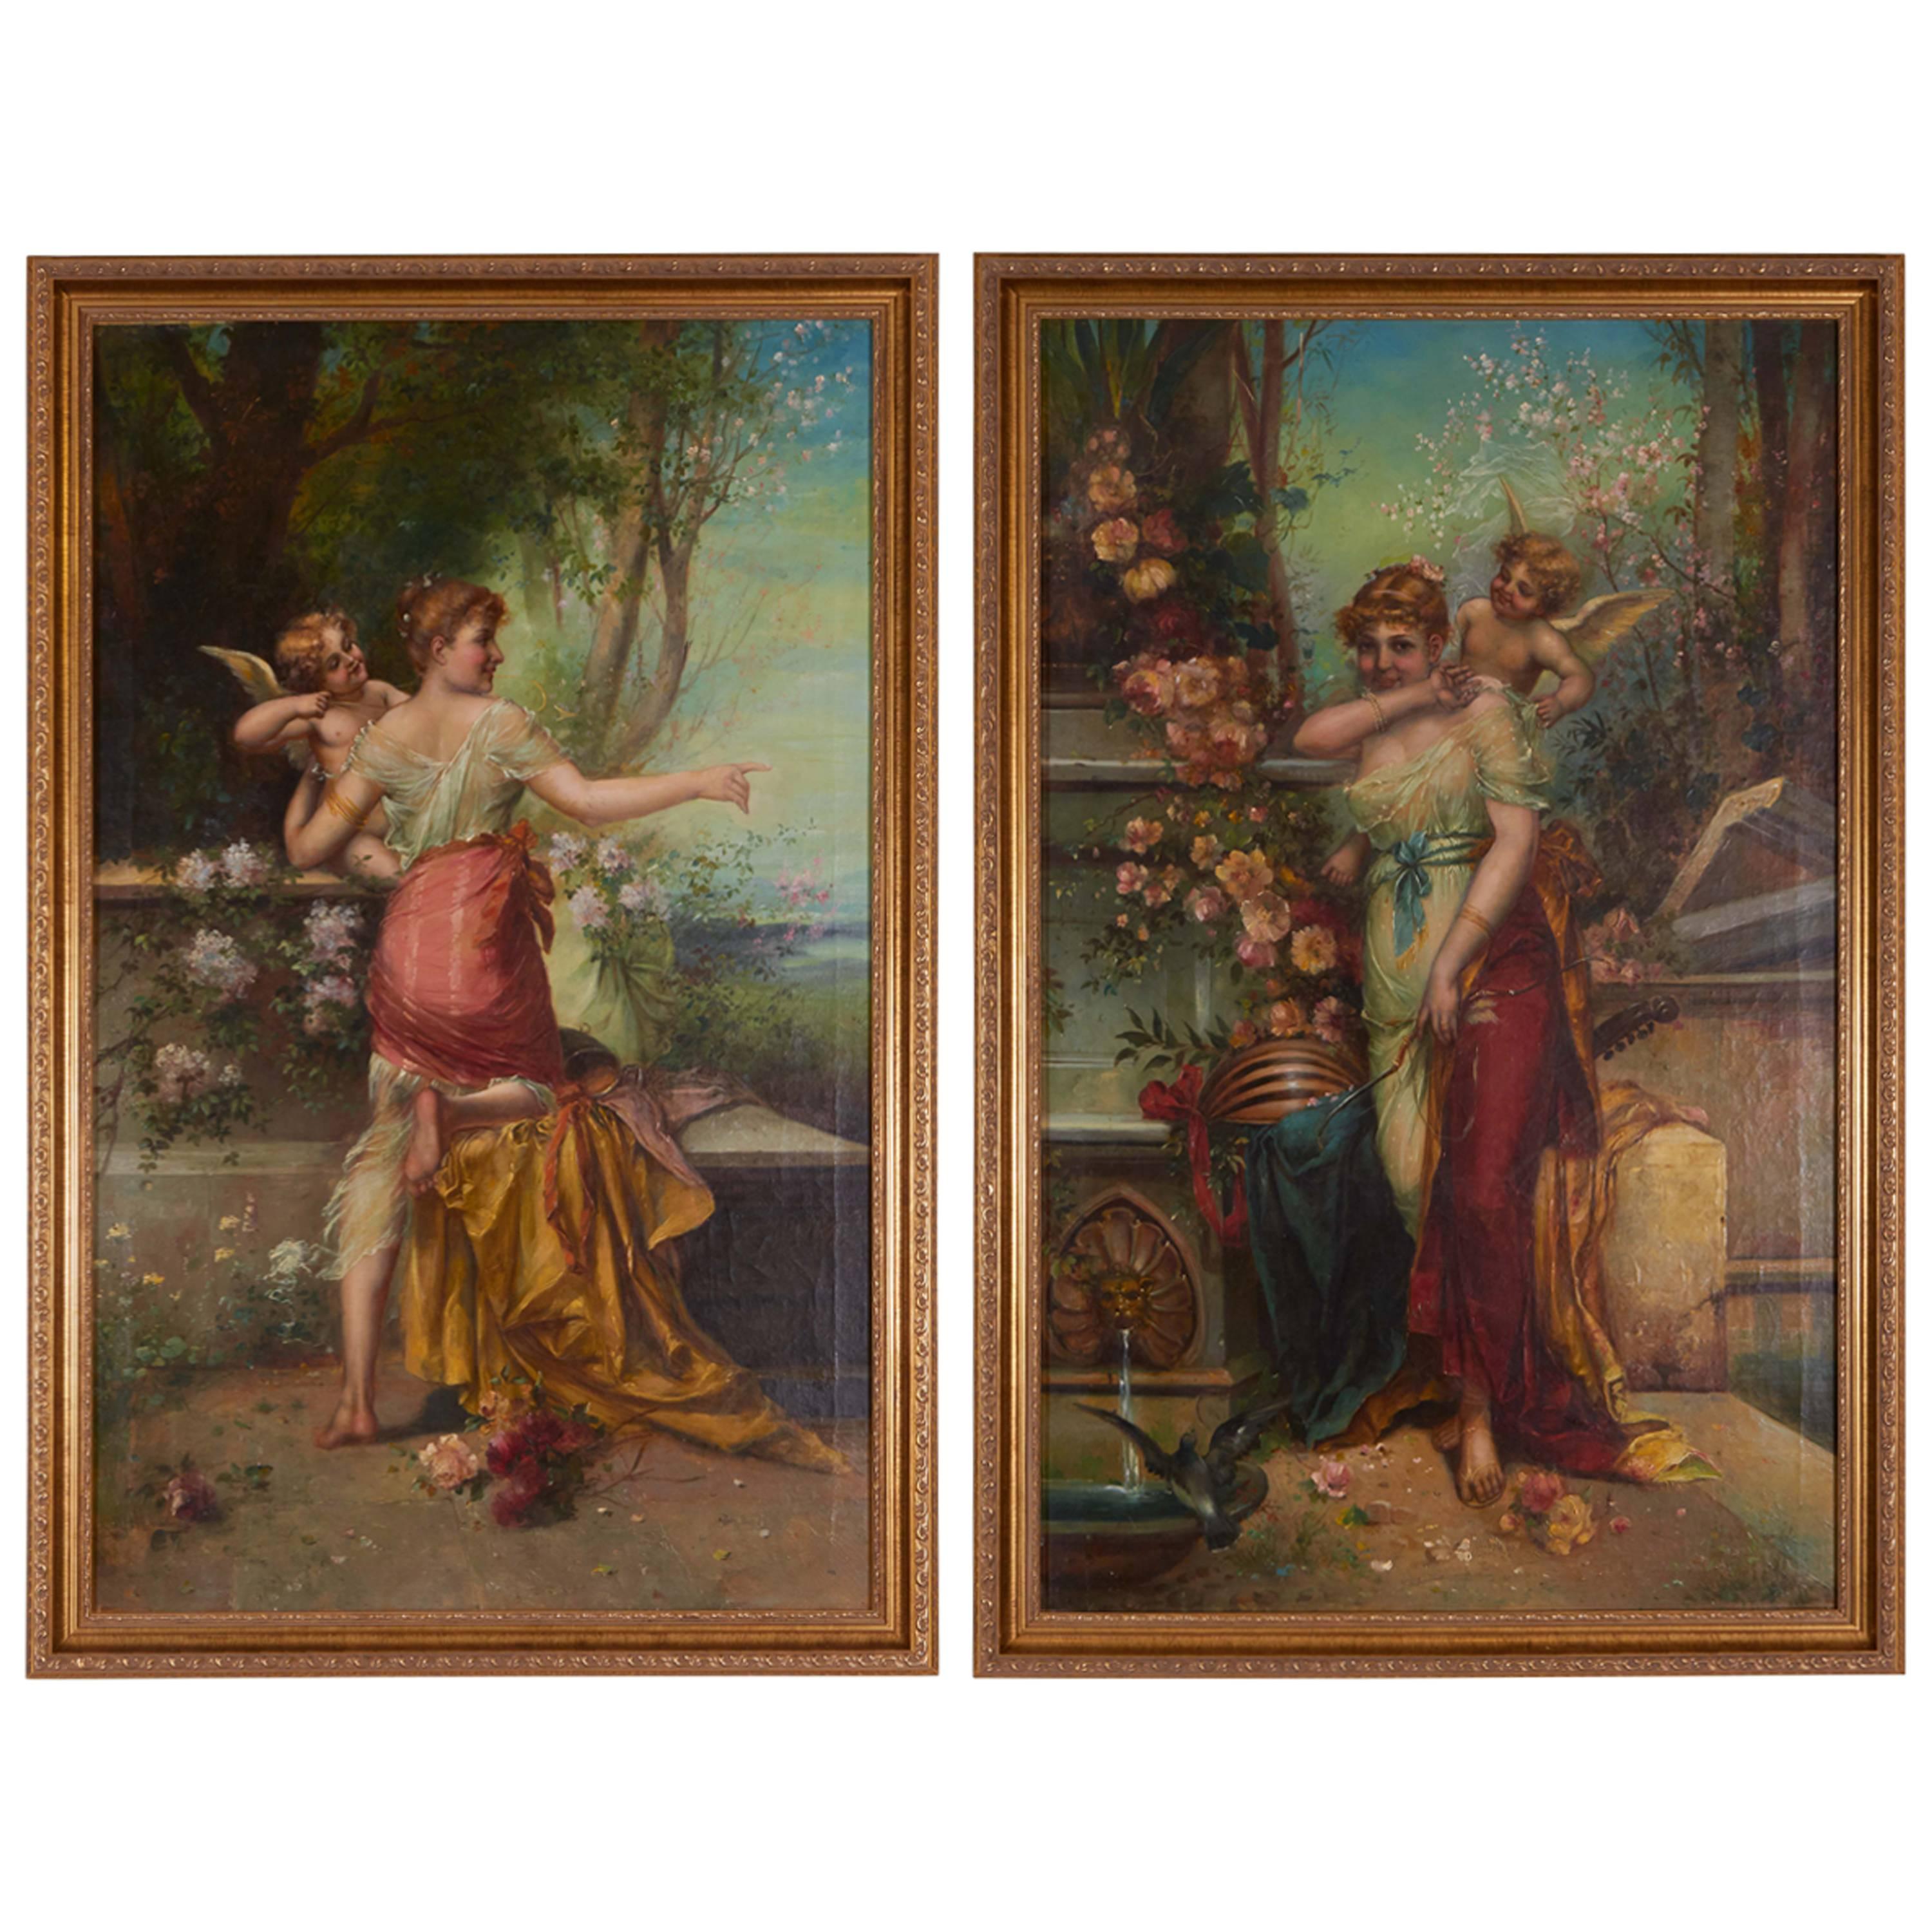 Hans Zatzka Attributed Pair of Oil on Canvas Paintings Venus and Psyche, Austria